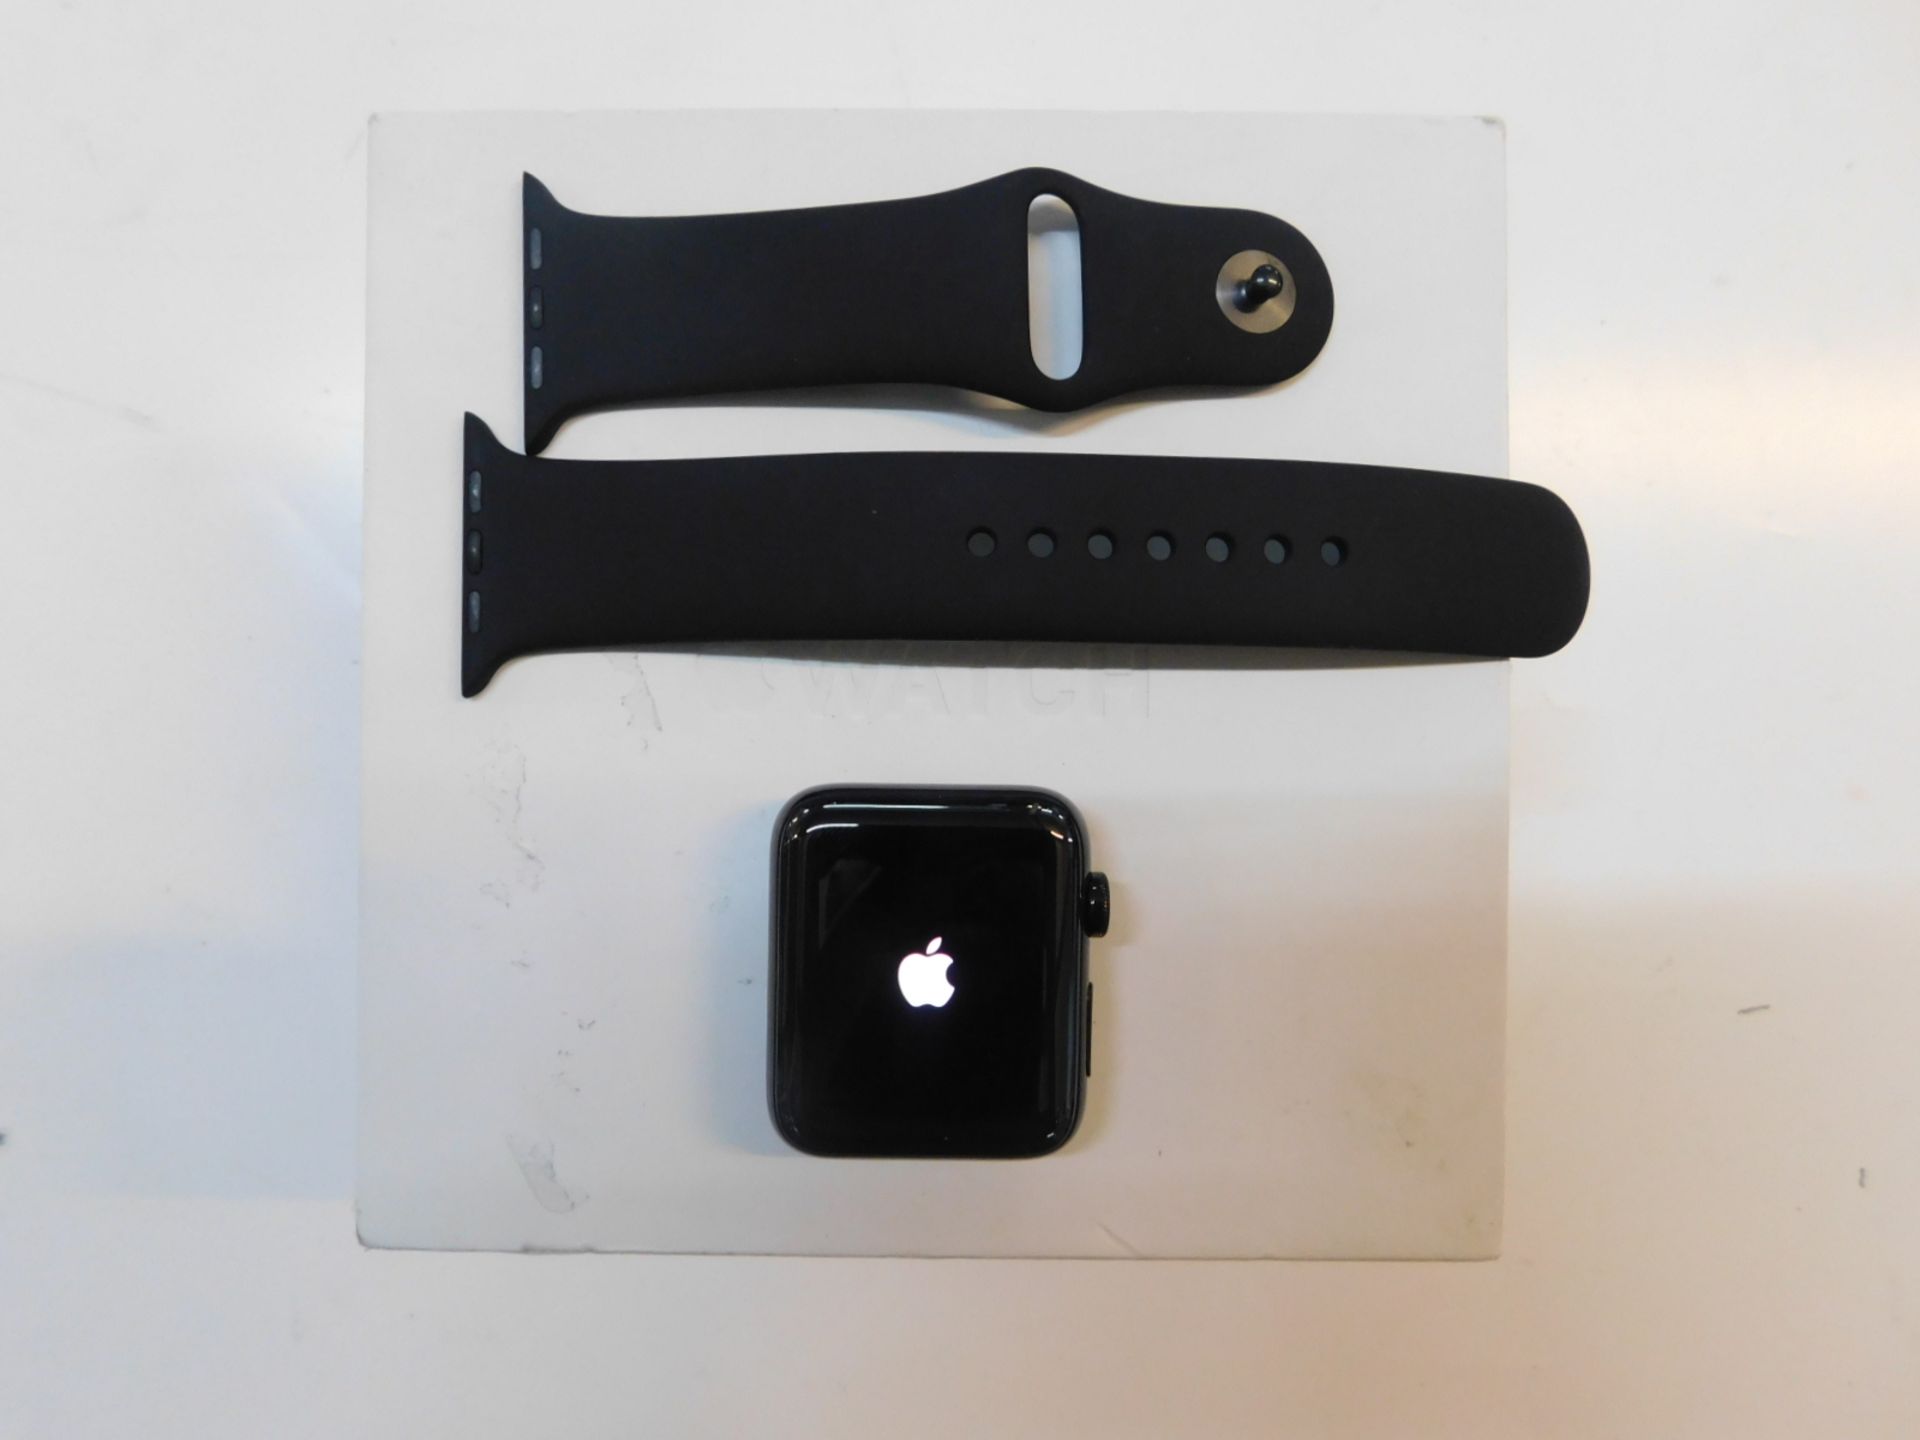 1 BOXED APPLE WATCH SERIES 2 MODEL MP4A2B/A 42MM SPACE BLACK RRP Â£299